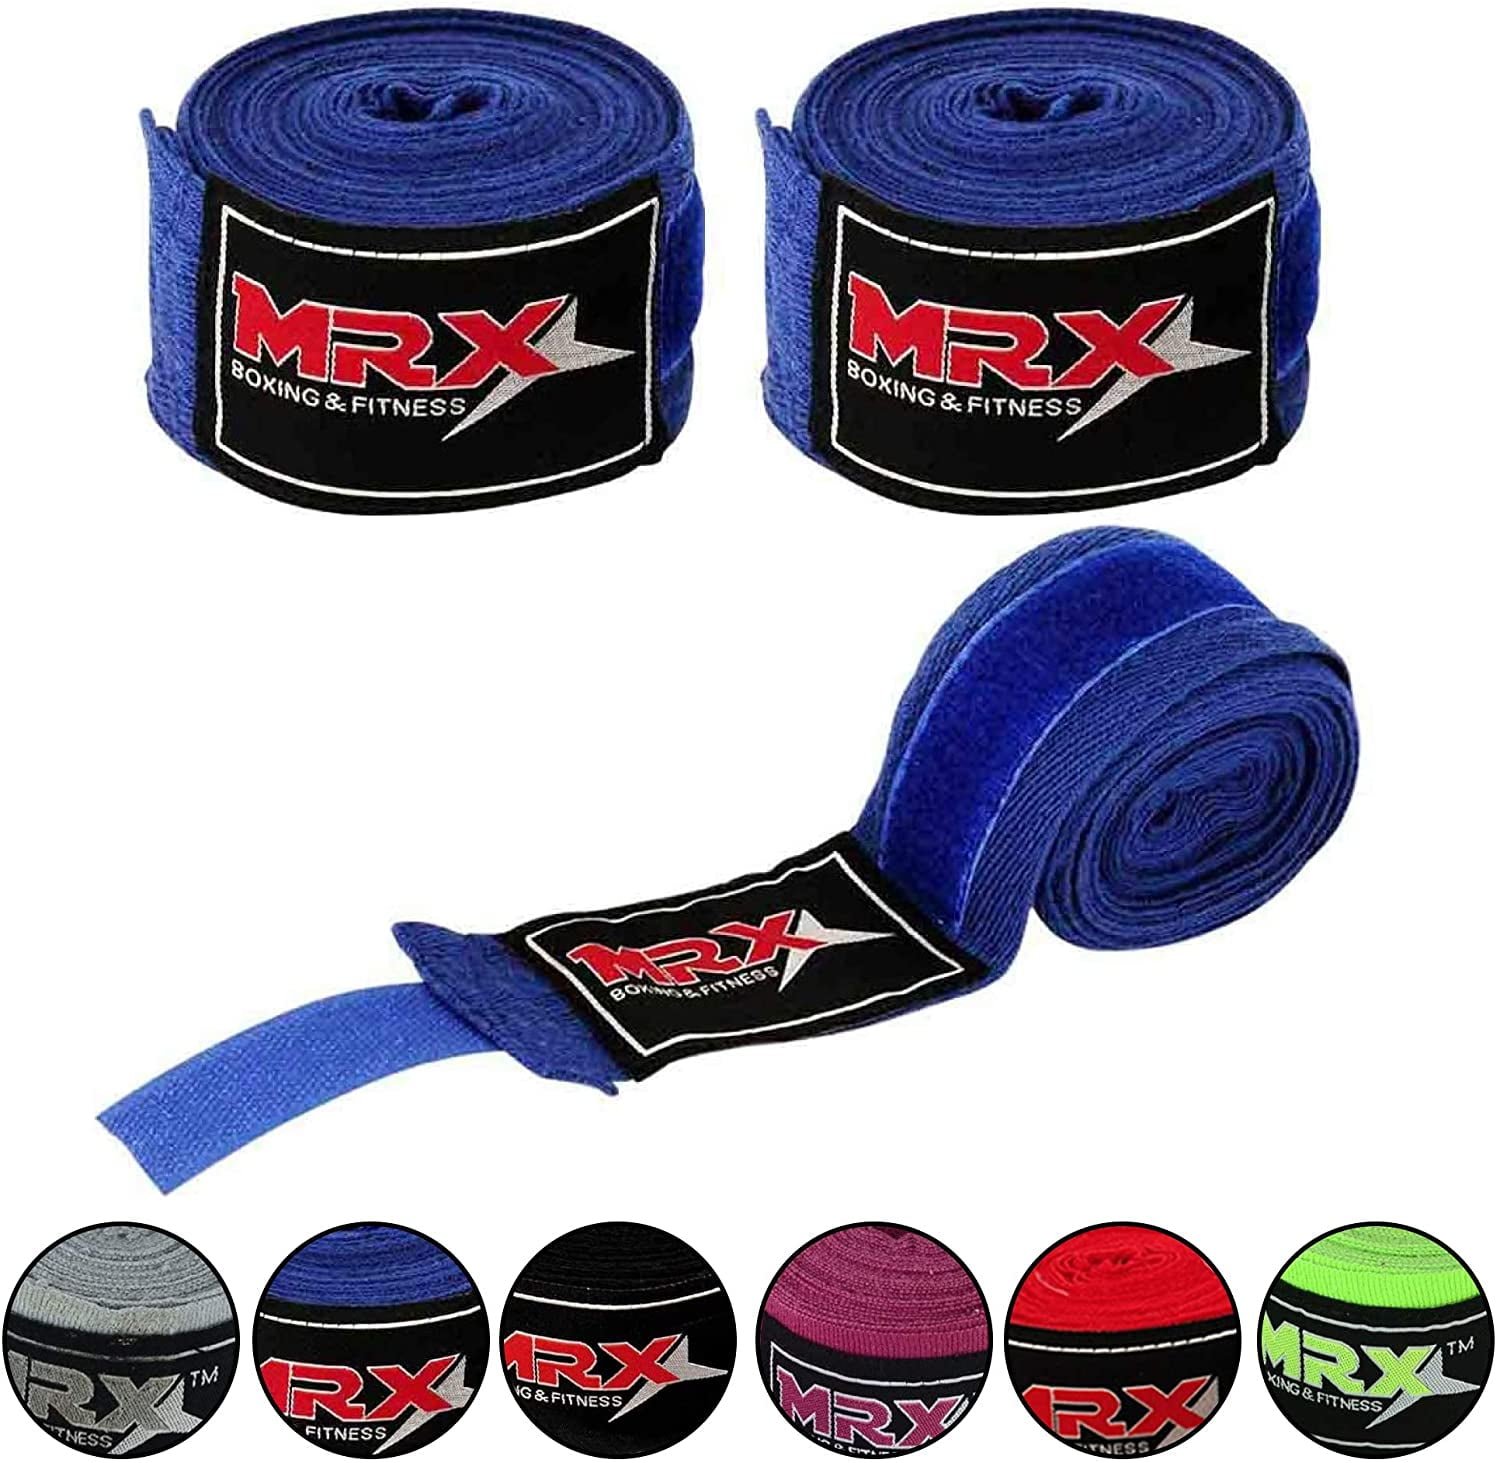 Details about   Boxing Fight MMA Kick Boxing Martial Arts Muay Thai Shorts BLUE Free HAND WRAP 